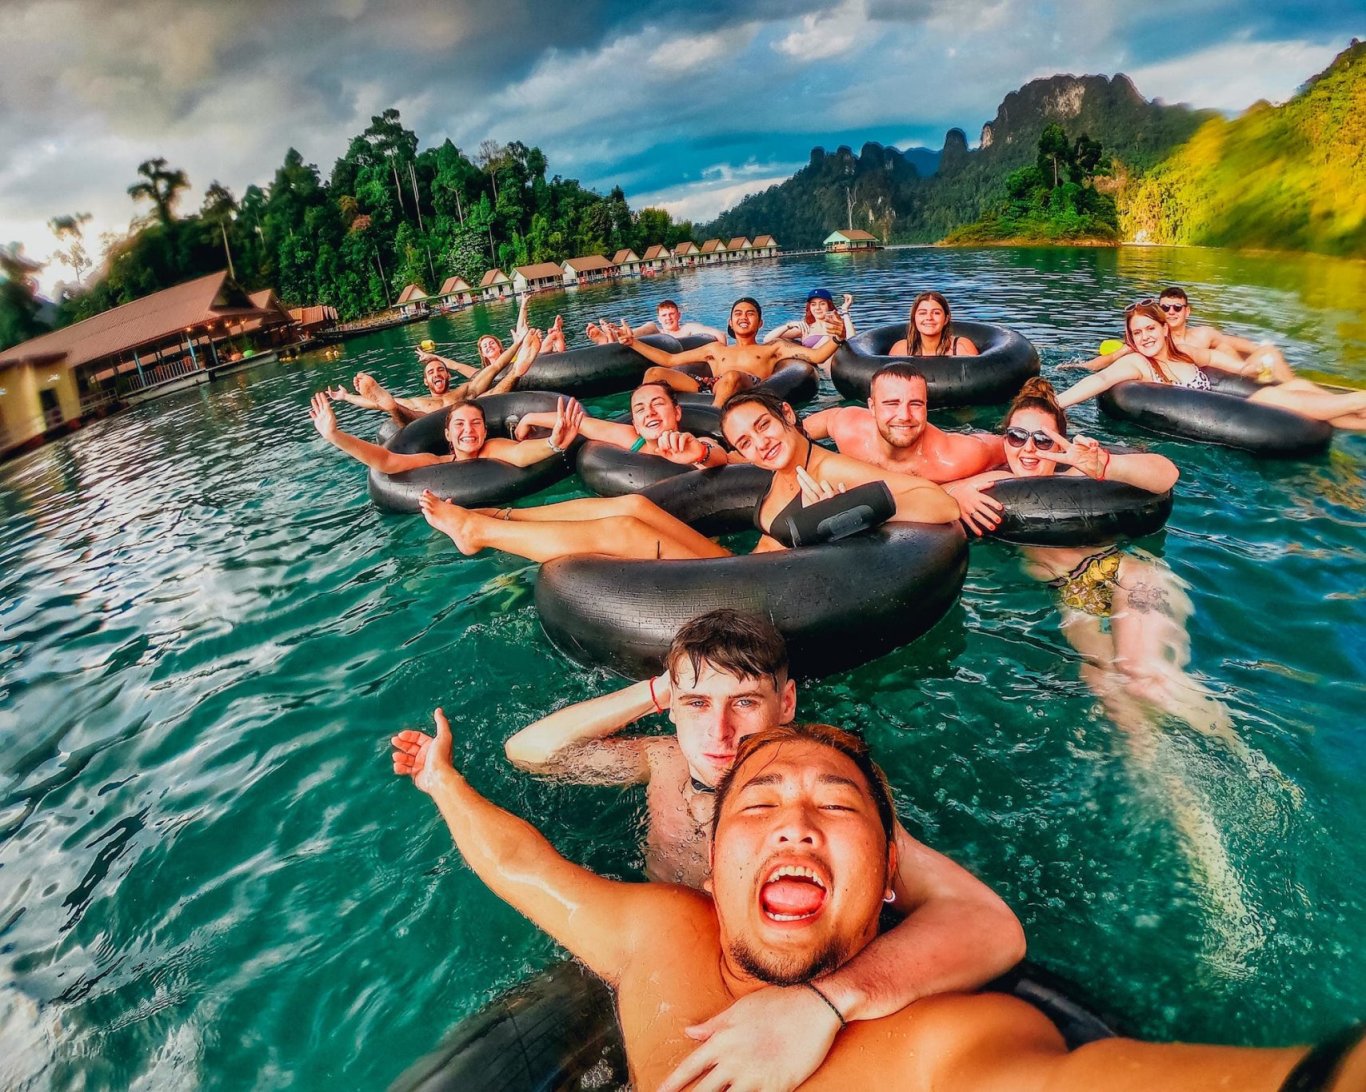 A group shot in donuts on the lake in Khao Sok National Park Thailand